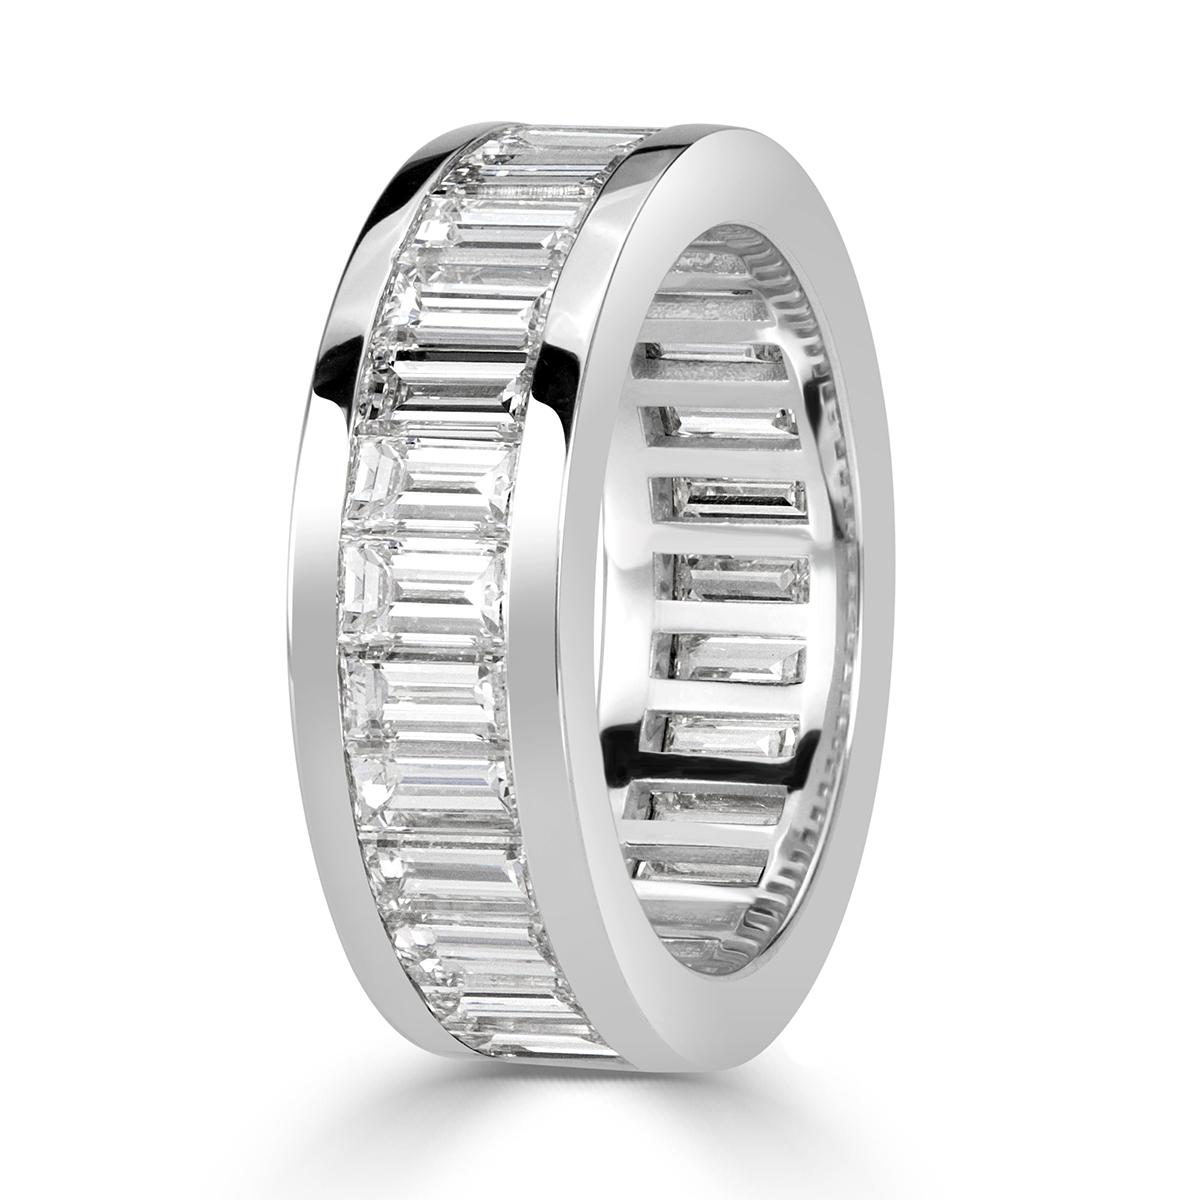 This stunning diamond eternity band showcases 4.97ct of baguette cut diamonds graded at F-G in color, VVS2-VS1 in clarity. They are channel set to perfection in high polish, 18k white gold. All eternity bands are shown in a size 6.5. We custom craft